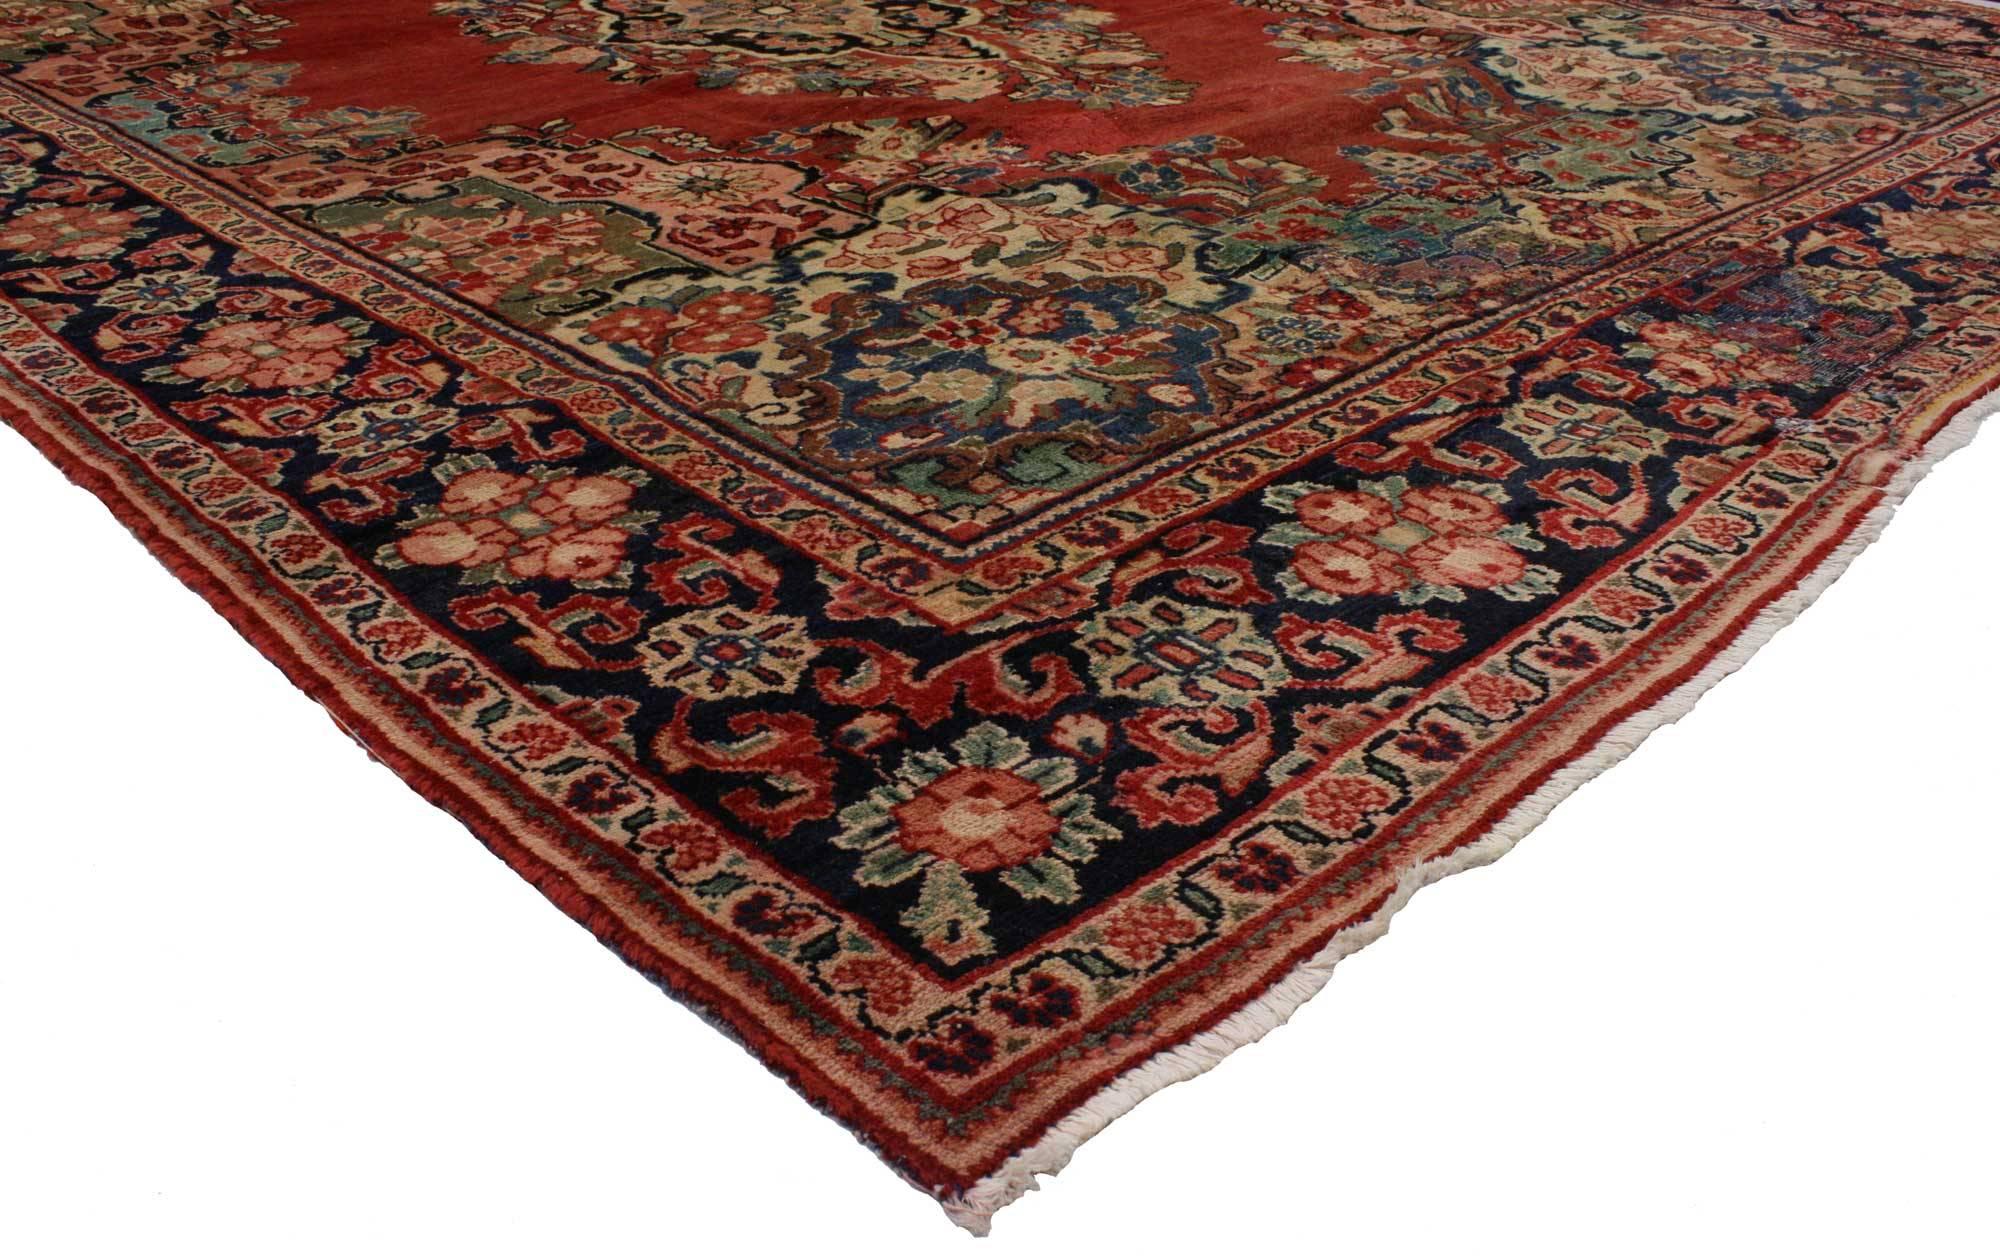 74414 Antique Persian Mahal Rug with English Country Cottage Style 09'00 X 11'05. Boasting a floral bounty in a range of warm hues, this antique Persian Mahal rug is a delightful example of English Country Cottage style. At the center of the